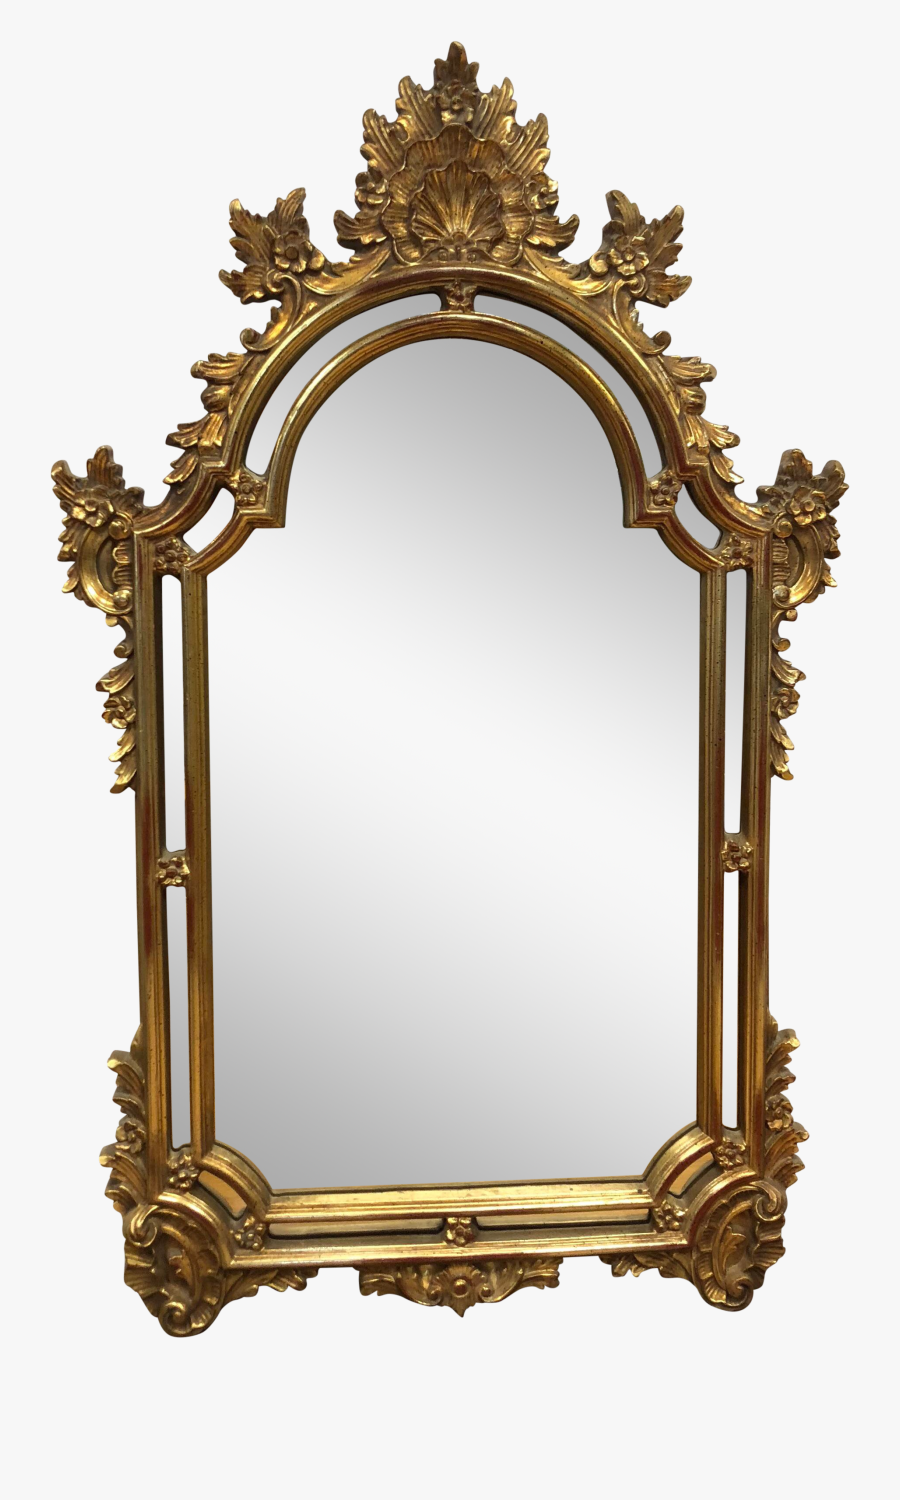 Gold Leaf Wall Mirror Clipart , Png Download - Wall Mirror Png, Transparent Clipart